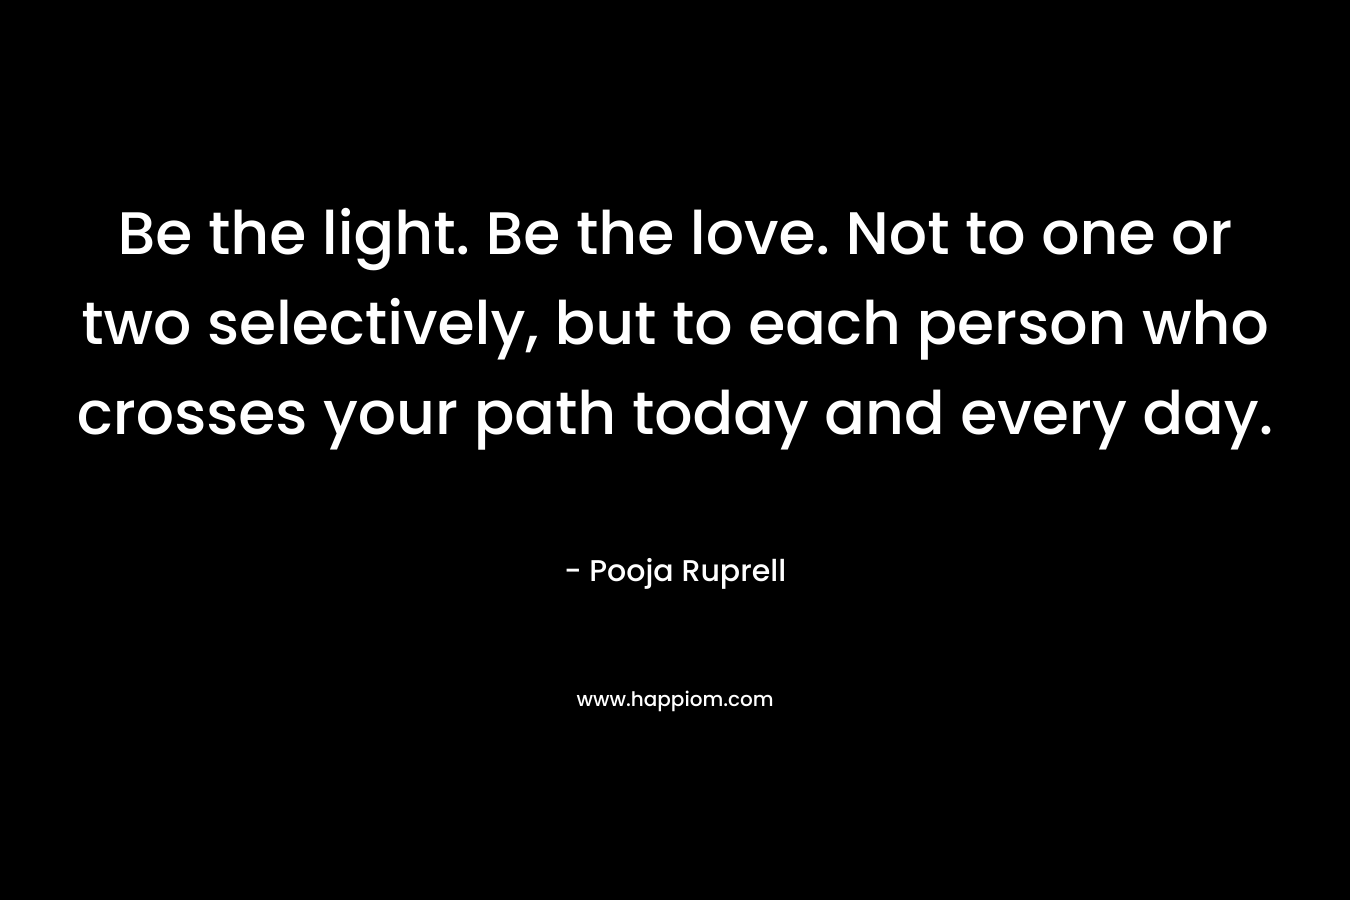 Be the light. Be the love. Not to one or two selectively, but to each person who crosses your path today and every day.